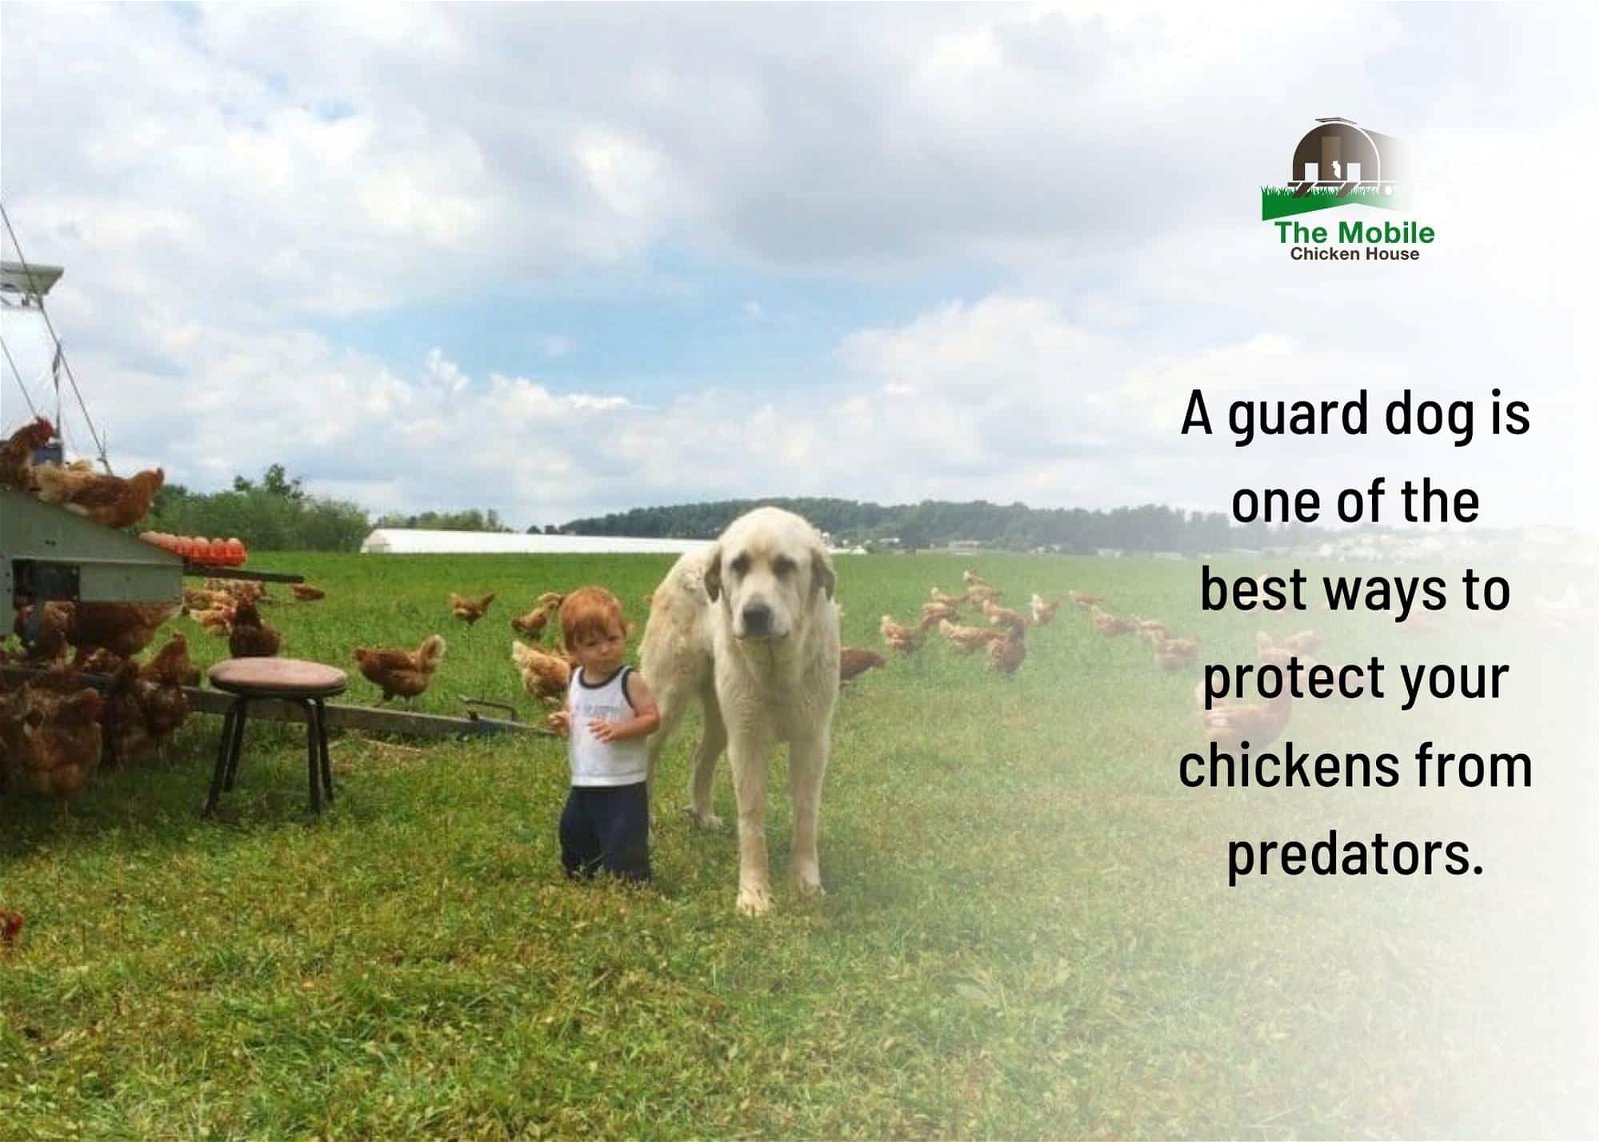 Protect pastured chickens with a guard dog